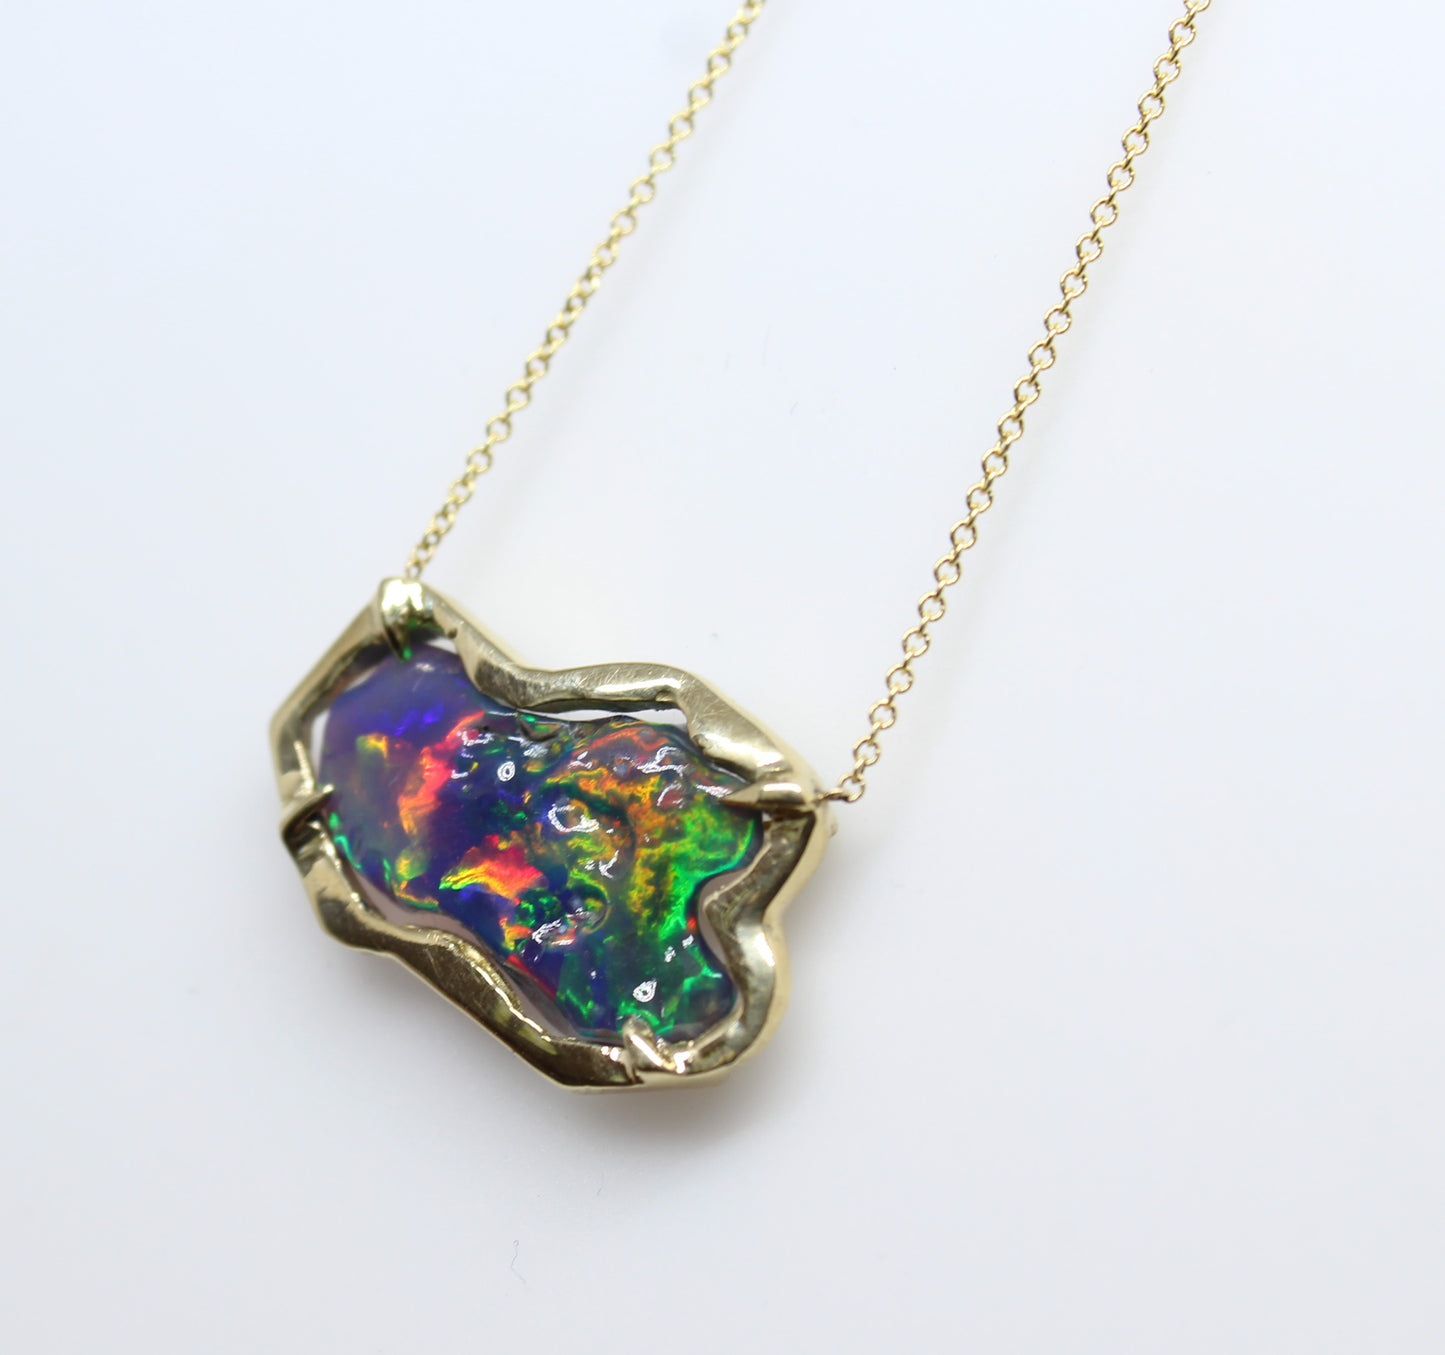 Black Carved Opal Pendant 14k Yellow Gold Split Chain Necklace #220